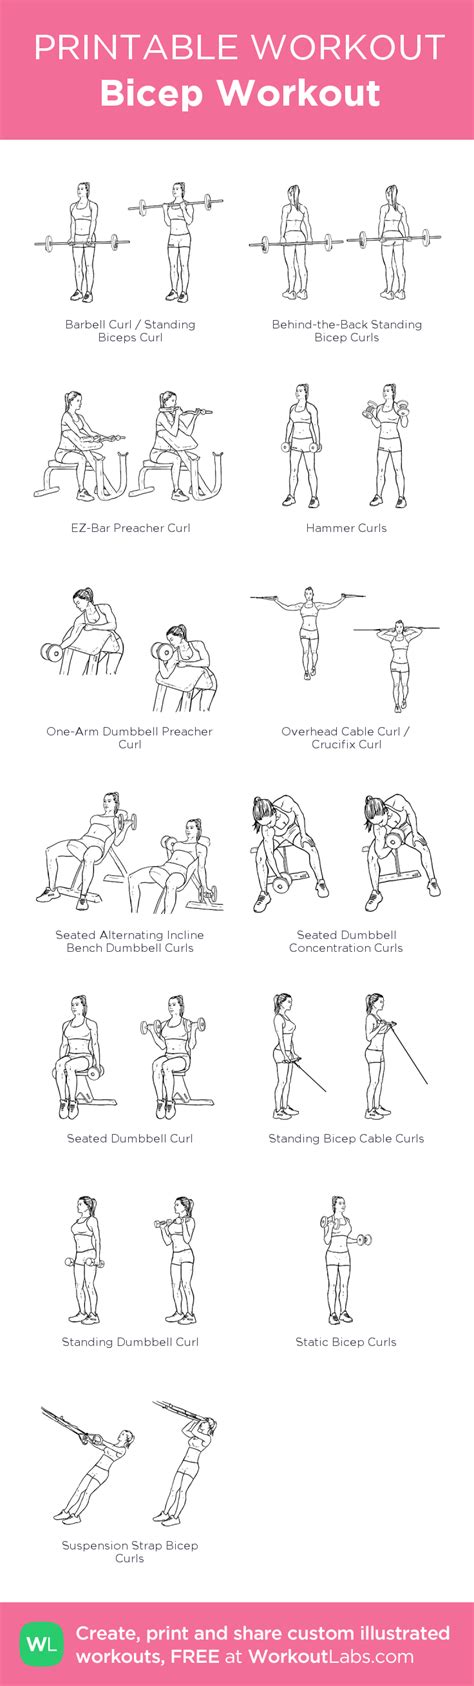 29 Fun Biceps Workout Chart Step By Step Pdf At Office Workout Life